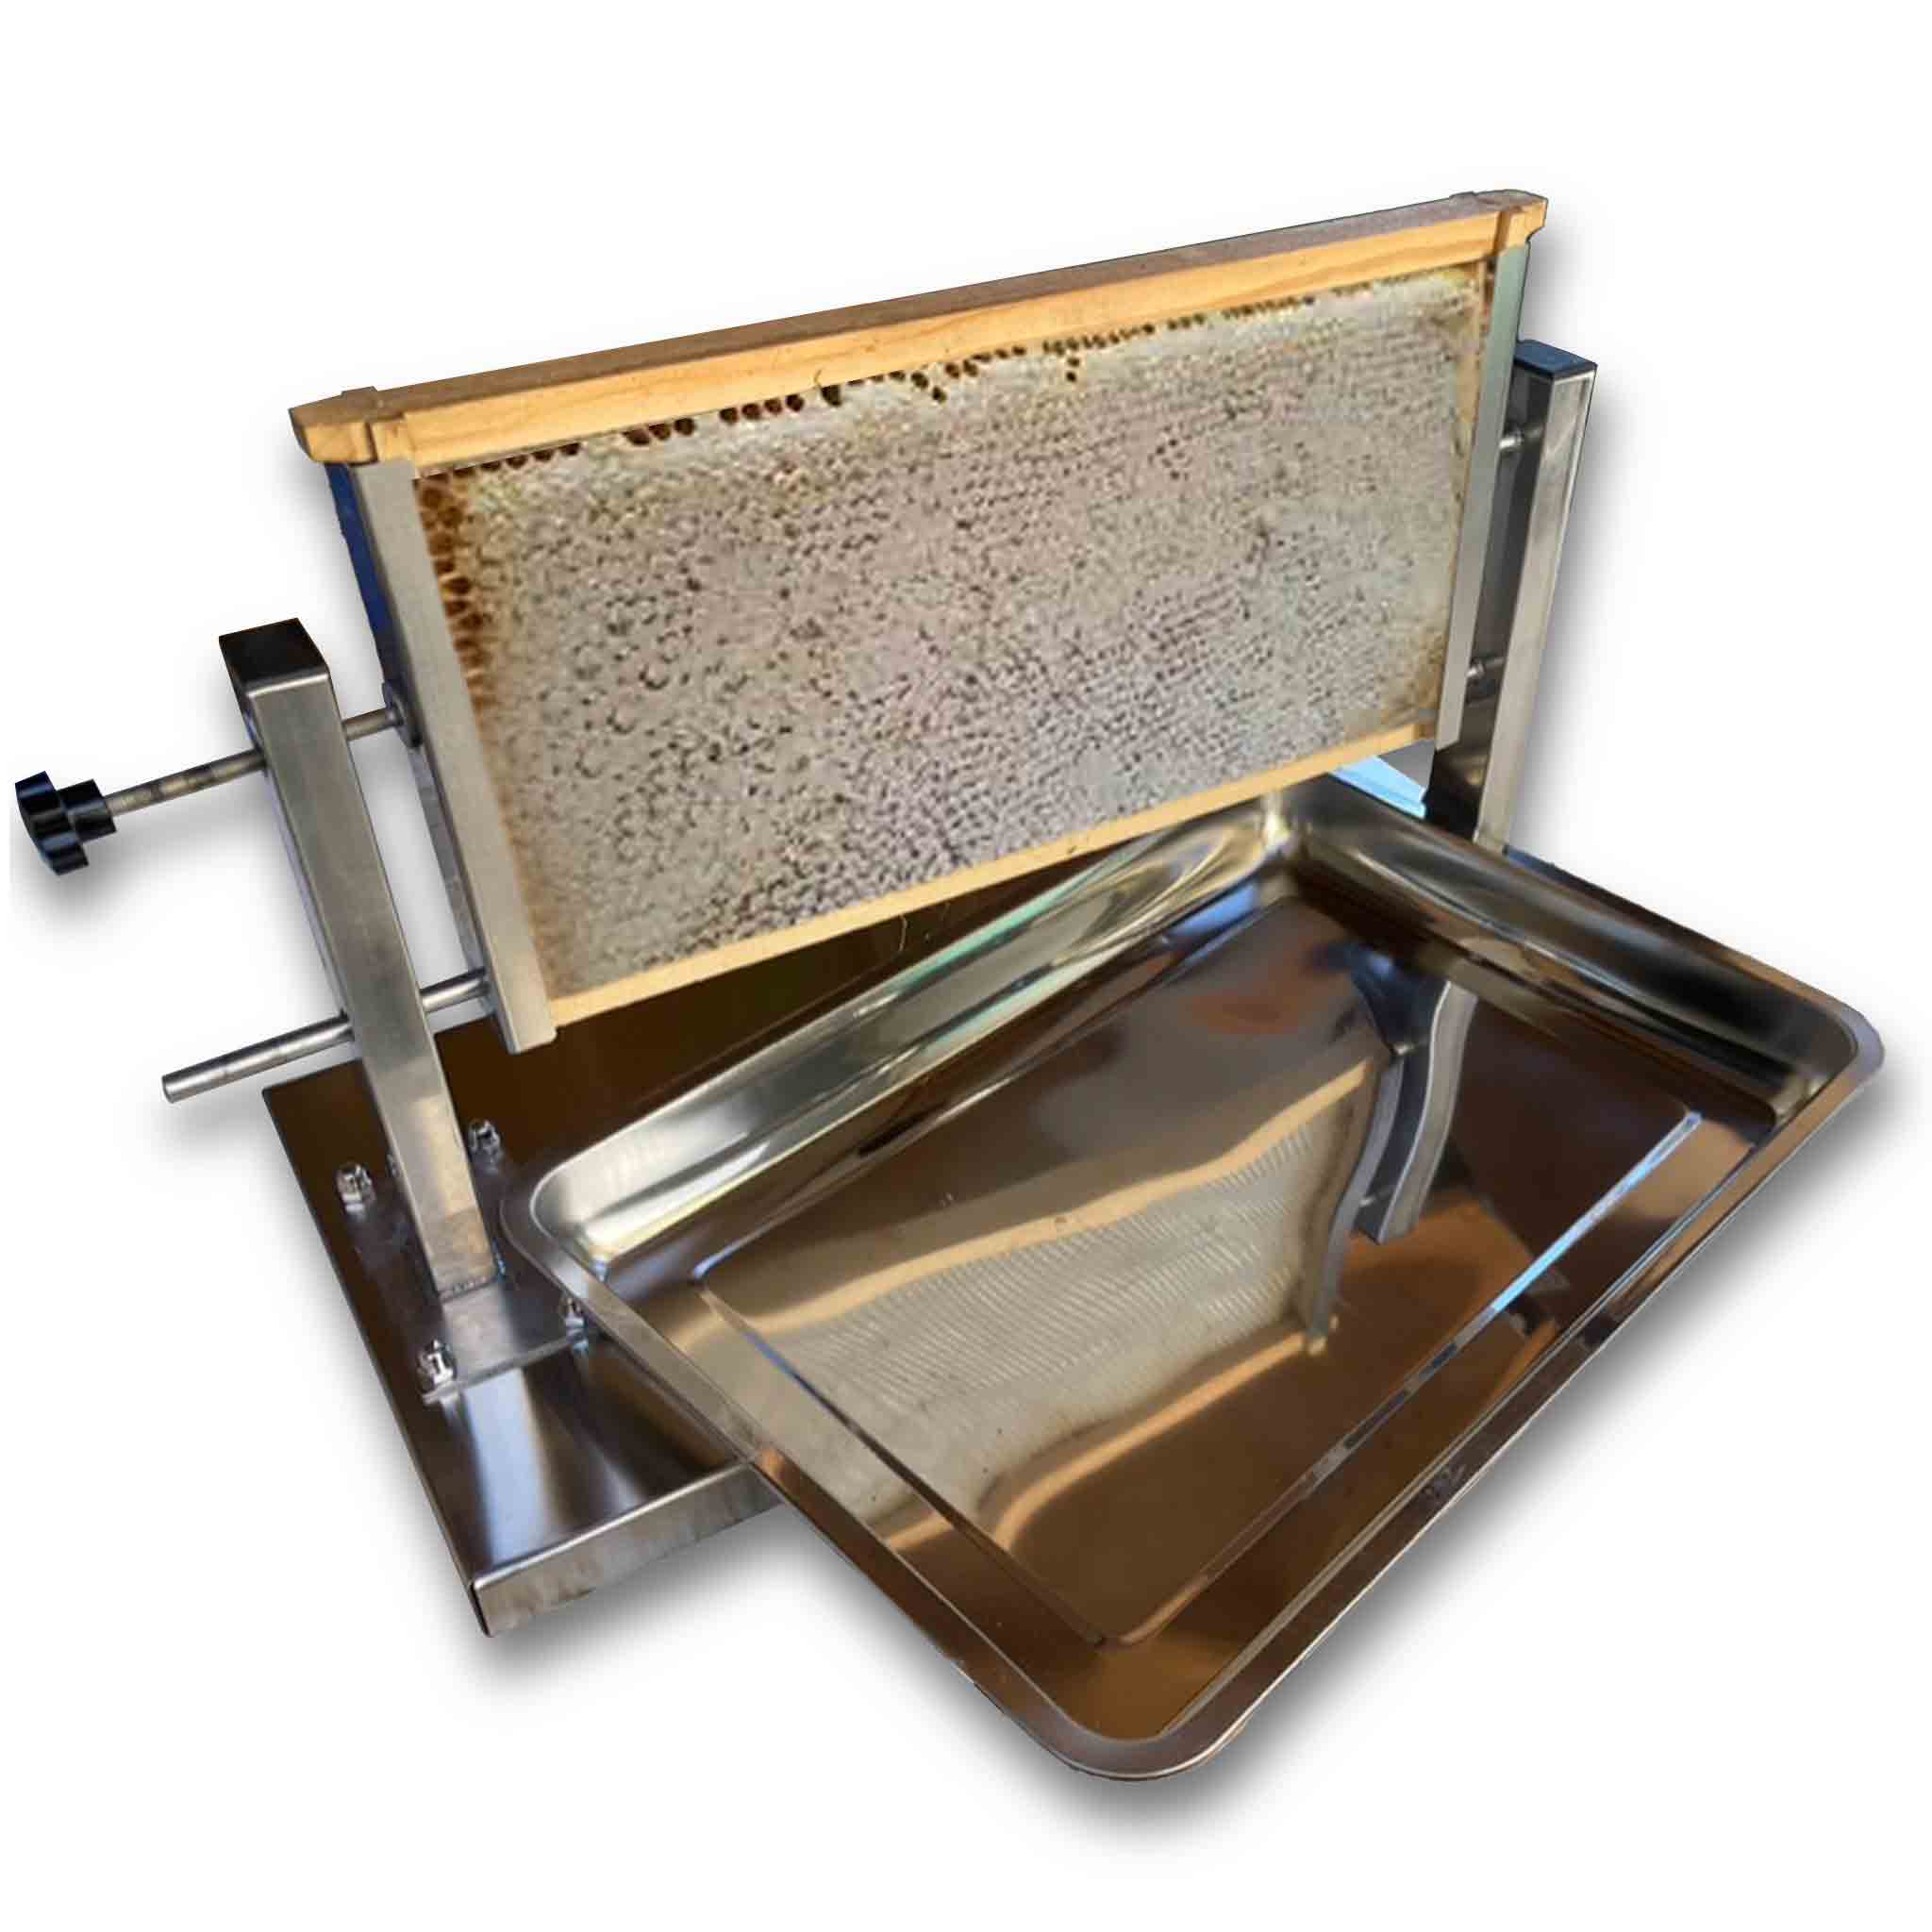 Honeycomb Stainless Steel Display Stand for holding a Honey Frame with Drip Tray for Restaurants and Cafe's - Display collection by Buzzbee Beekeeping Supplies